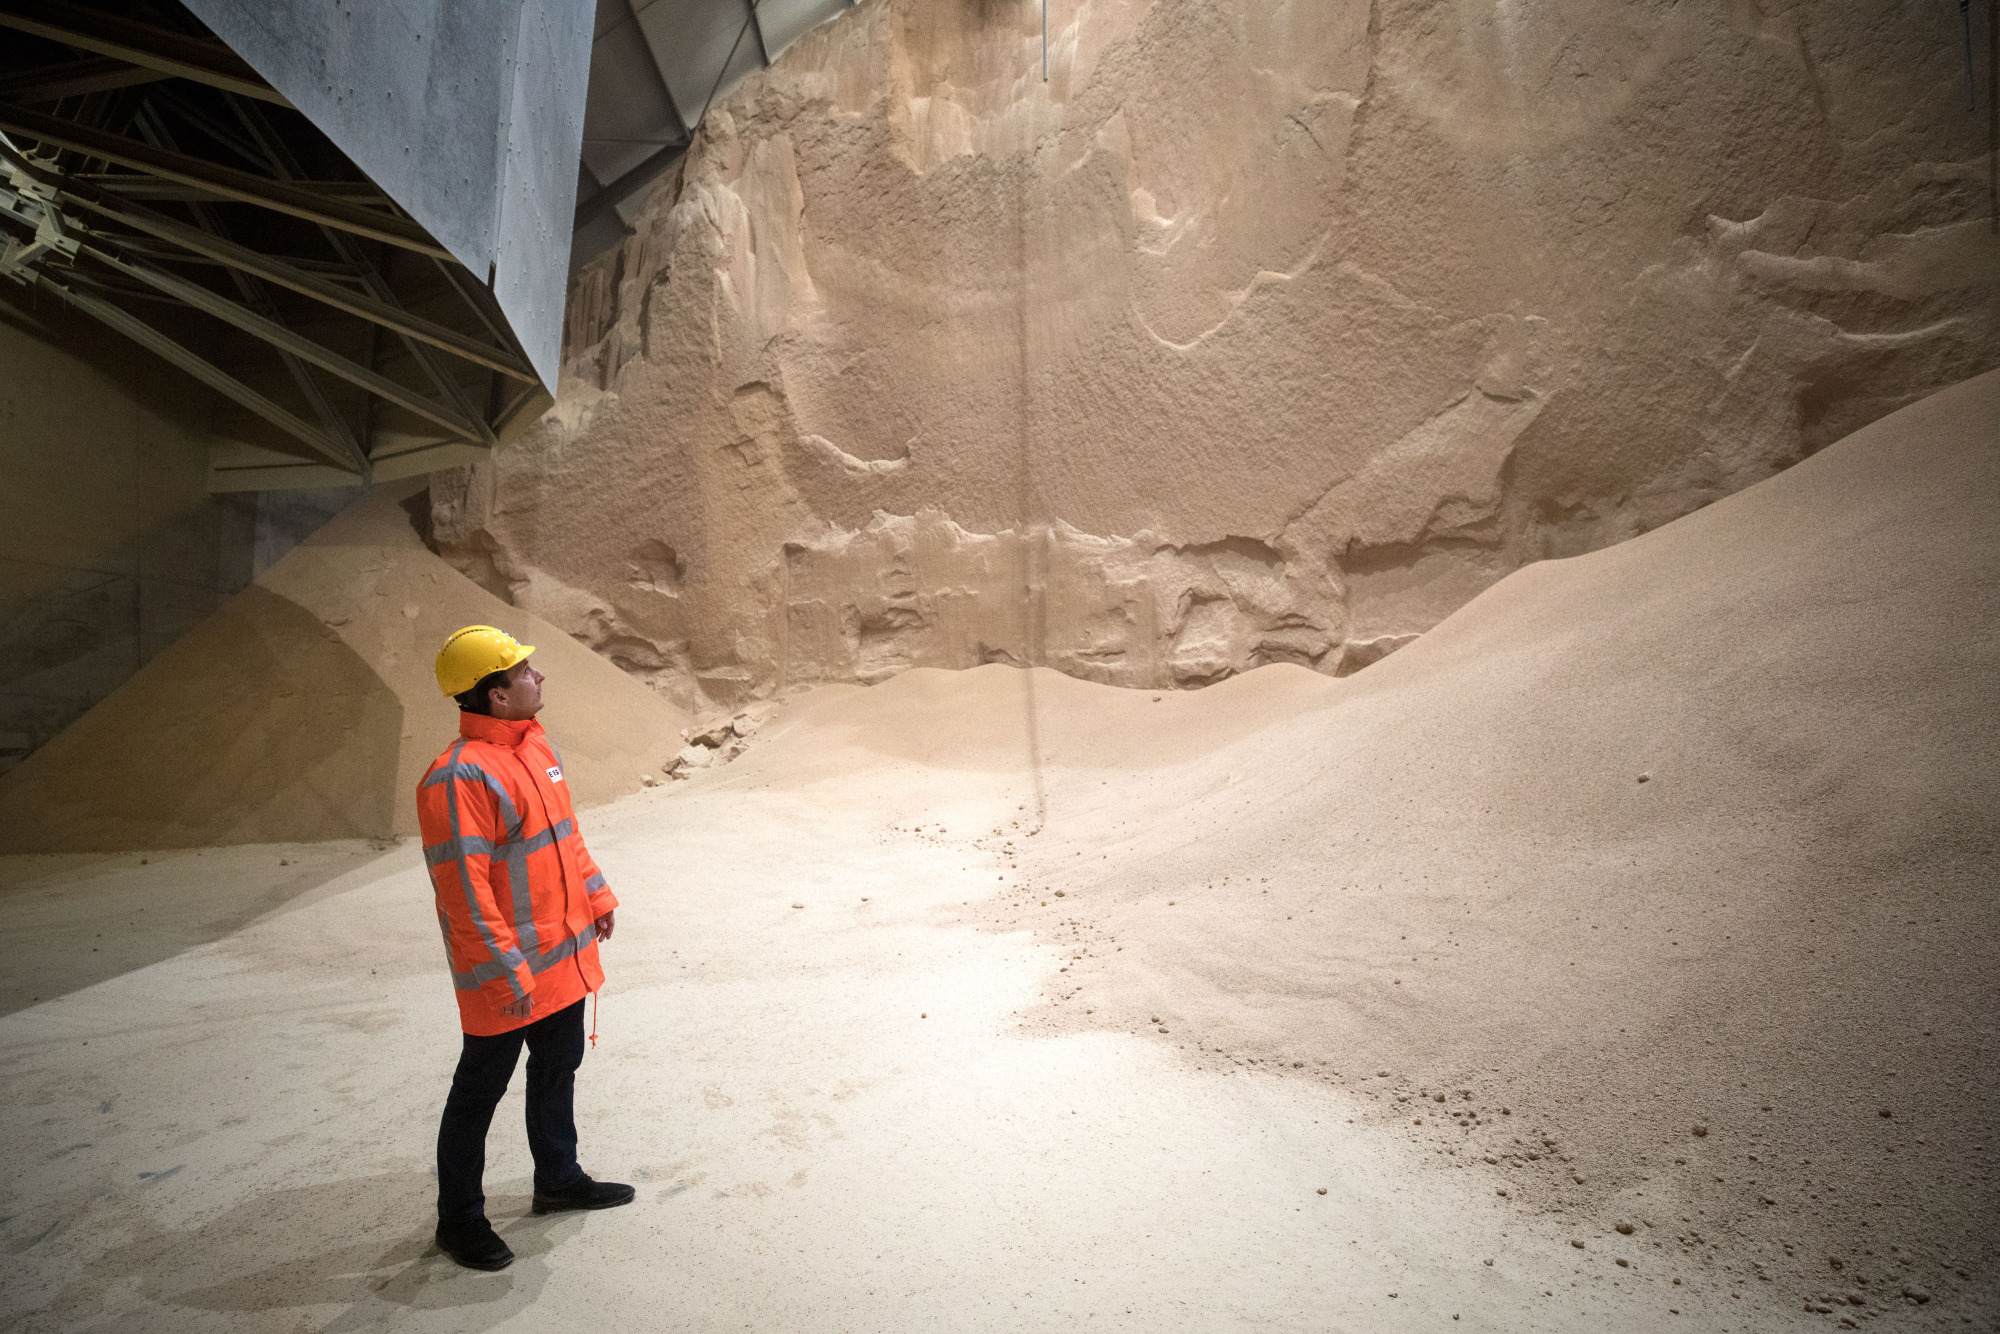 An employee looks at soybean meal produced by Glencore Plc as it is stored before transportation in a grain flat storage at the European Bulk Services (E.B.S.) terminal at the Port of Rotterdam in Rotterdam, Netherlands, on Tuesday, April 25, 2017.&nbsp;